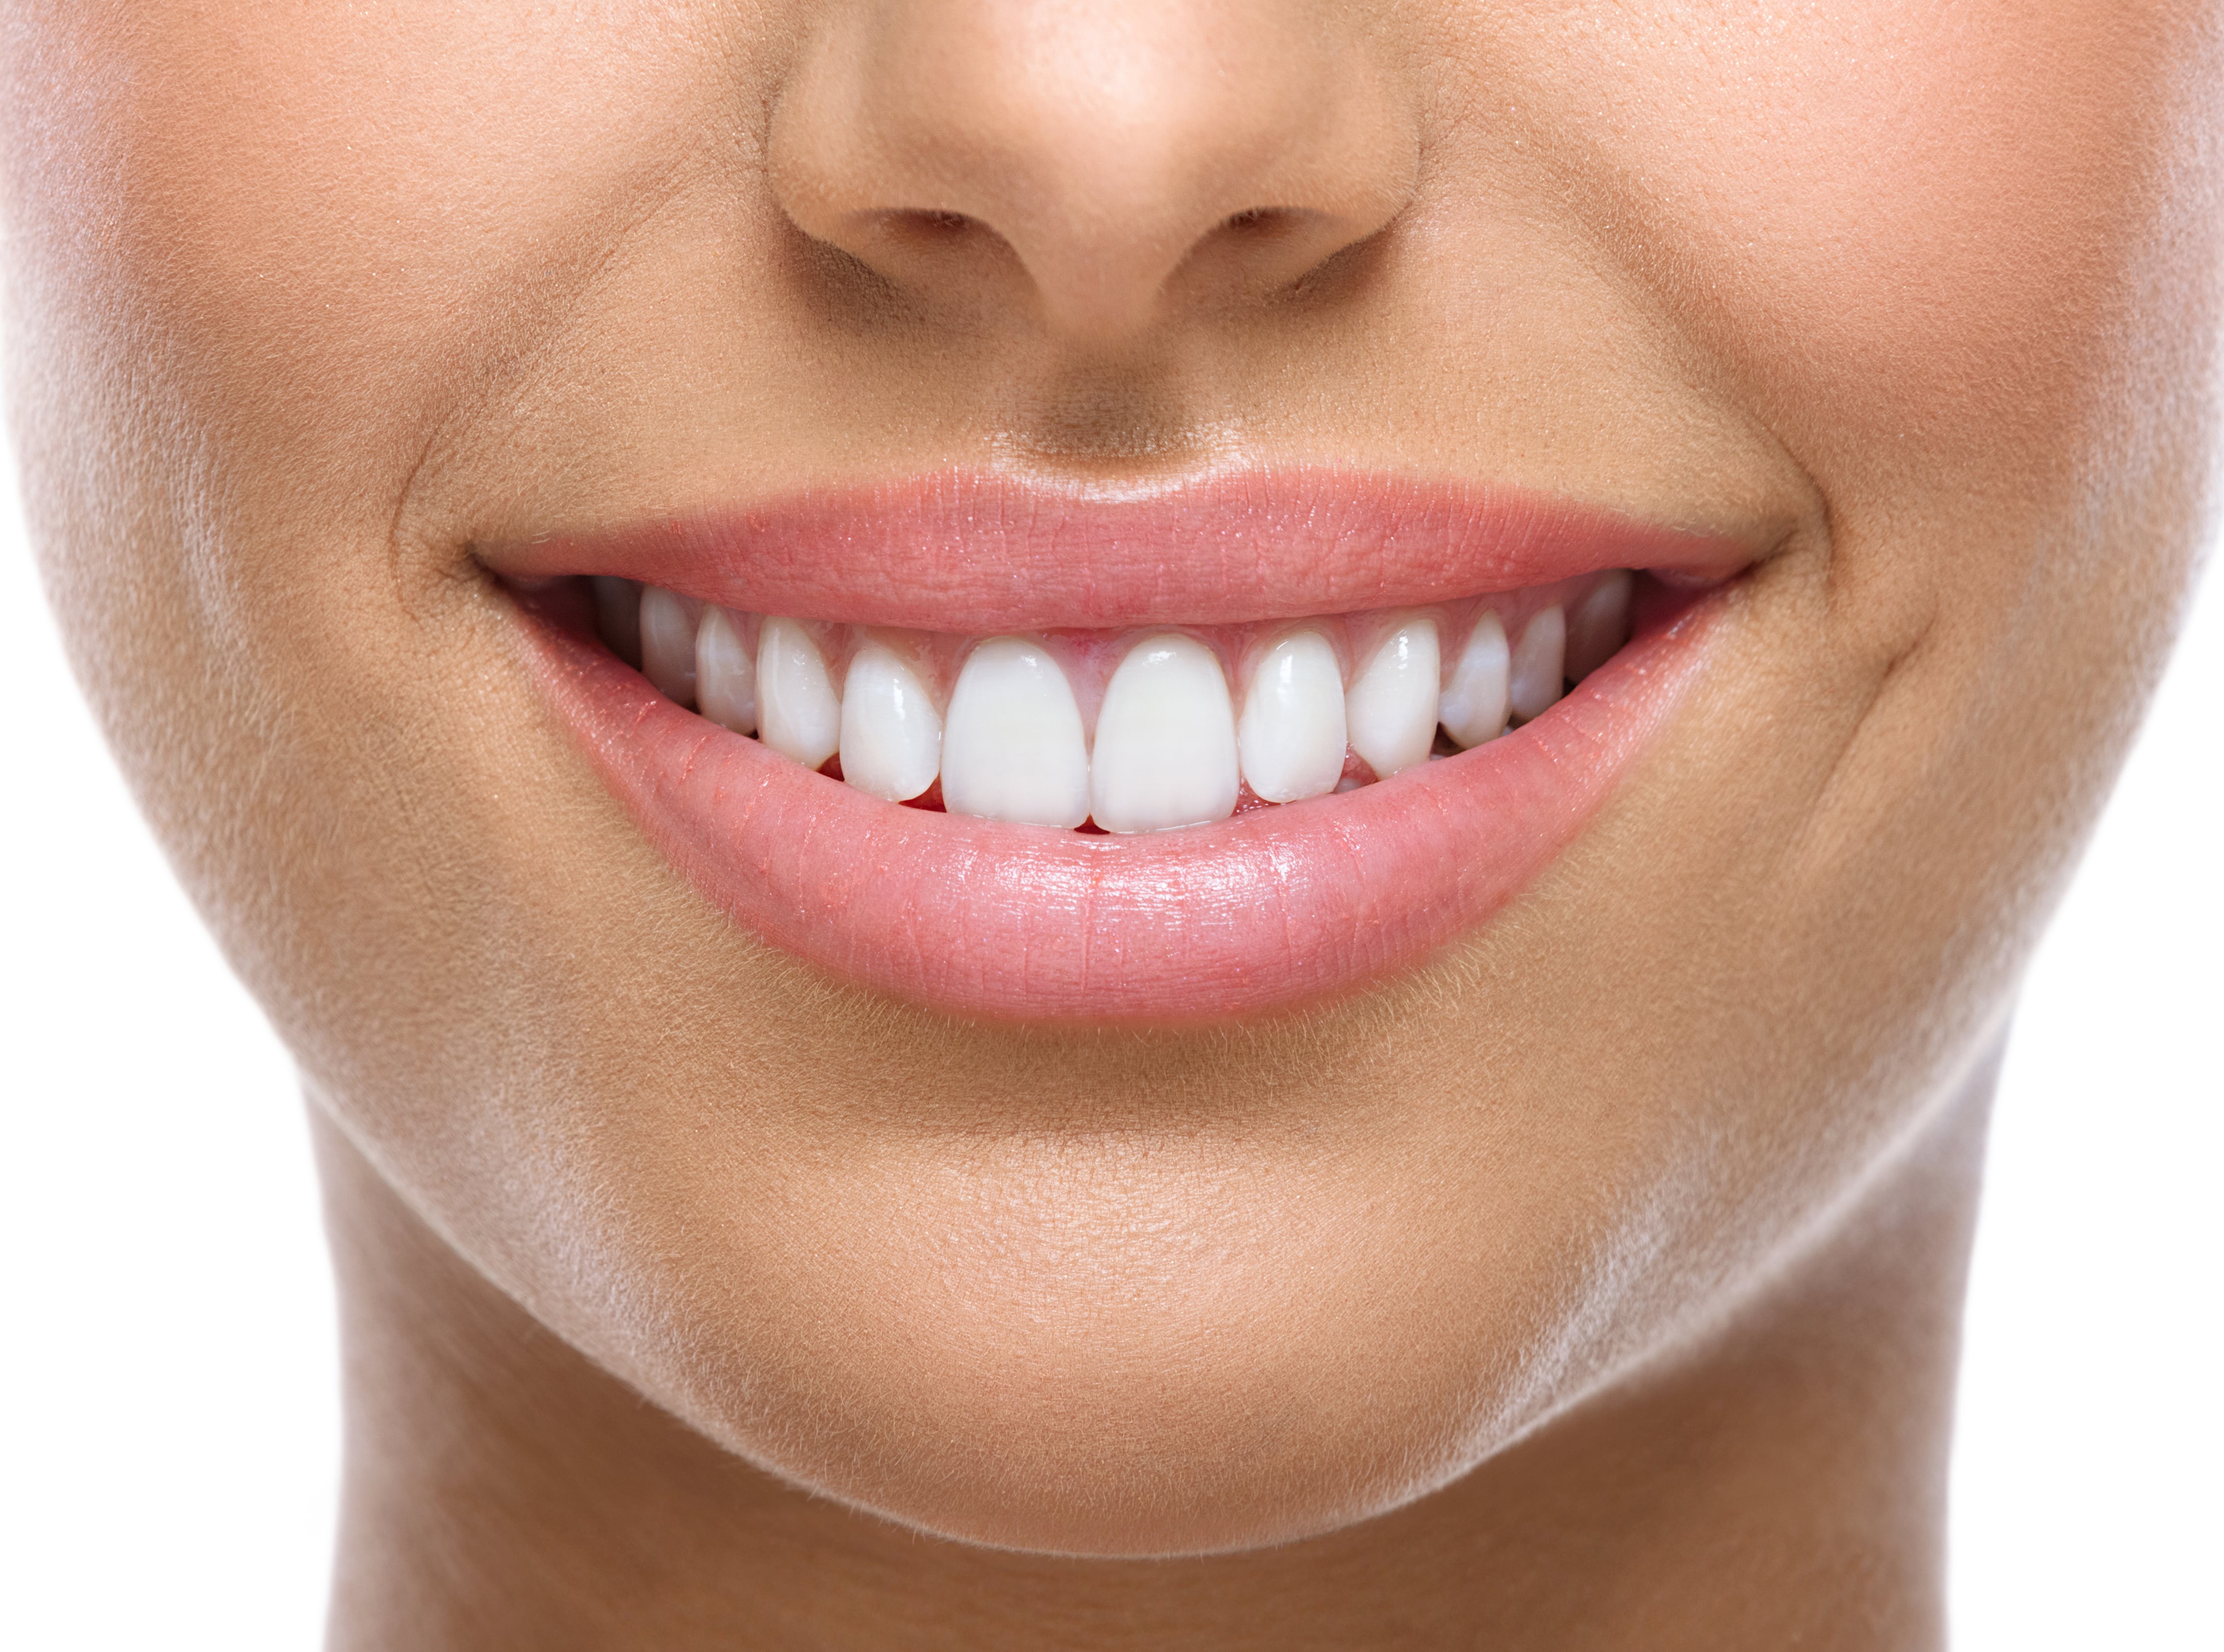 Cosmetic Dentistry- Giving People A Reason To Smile